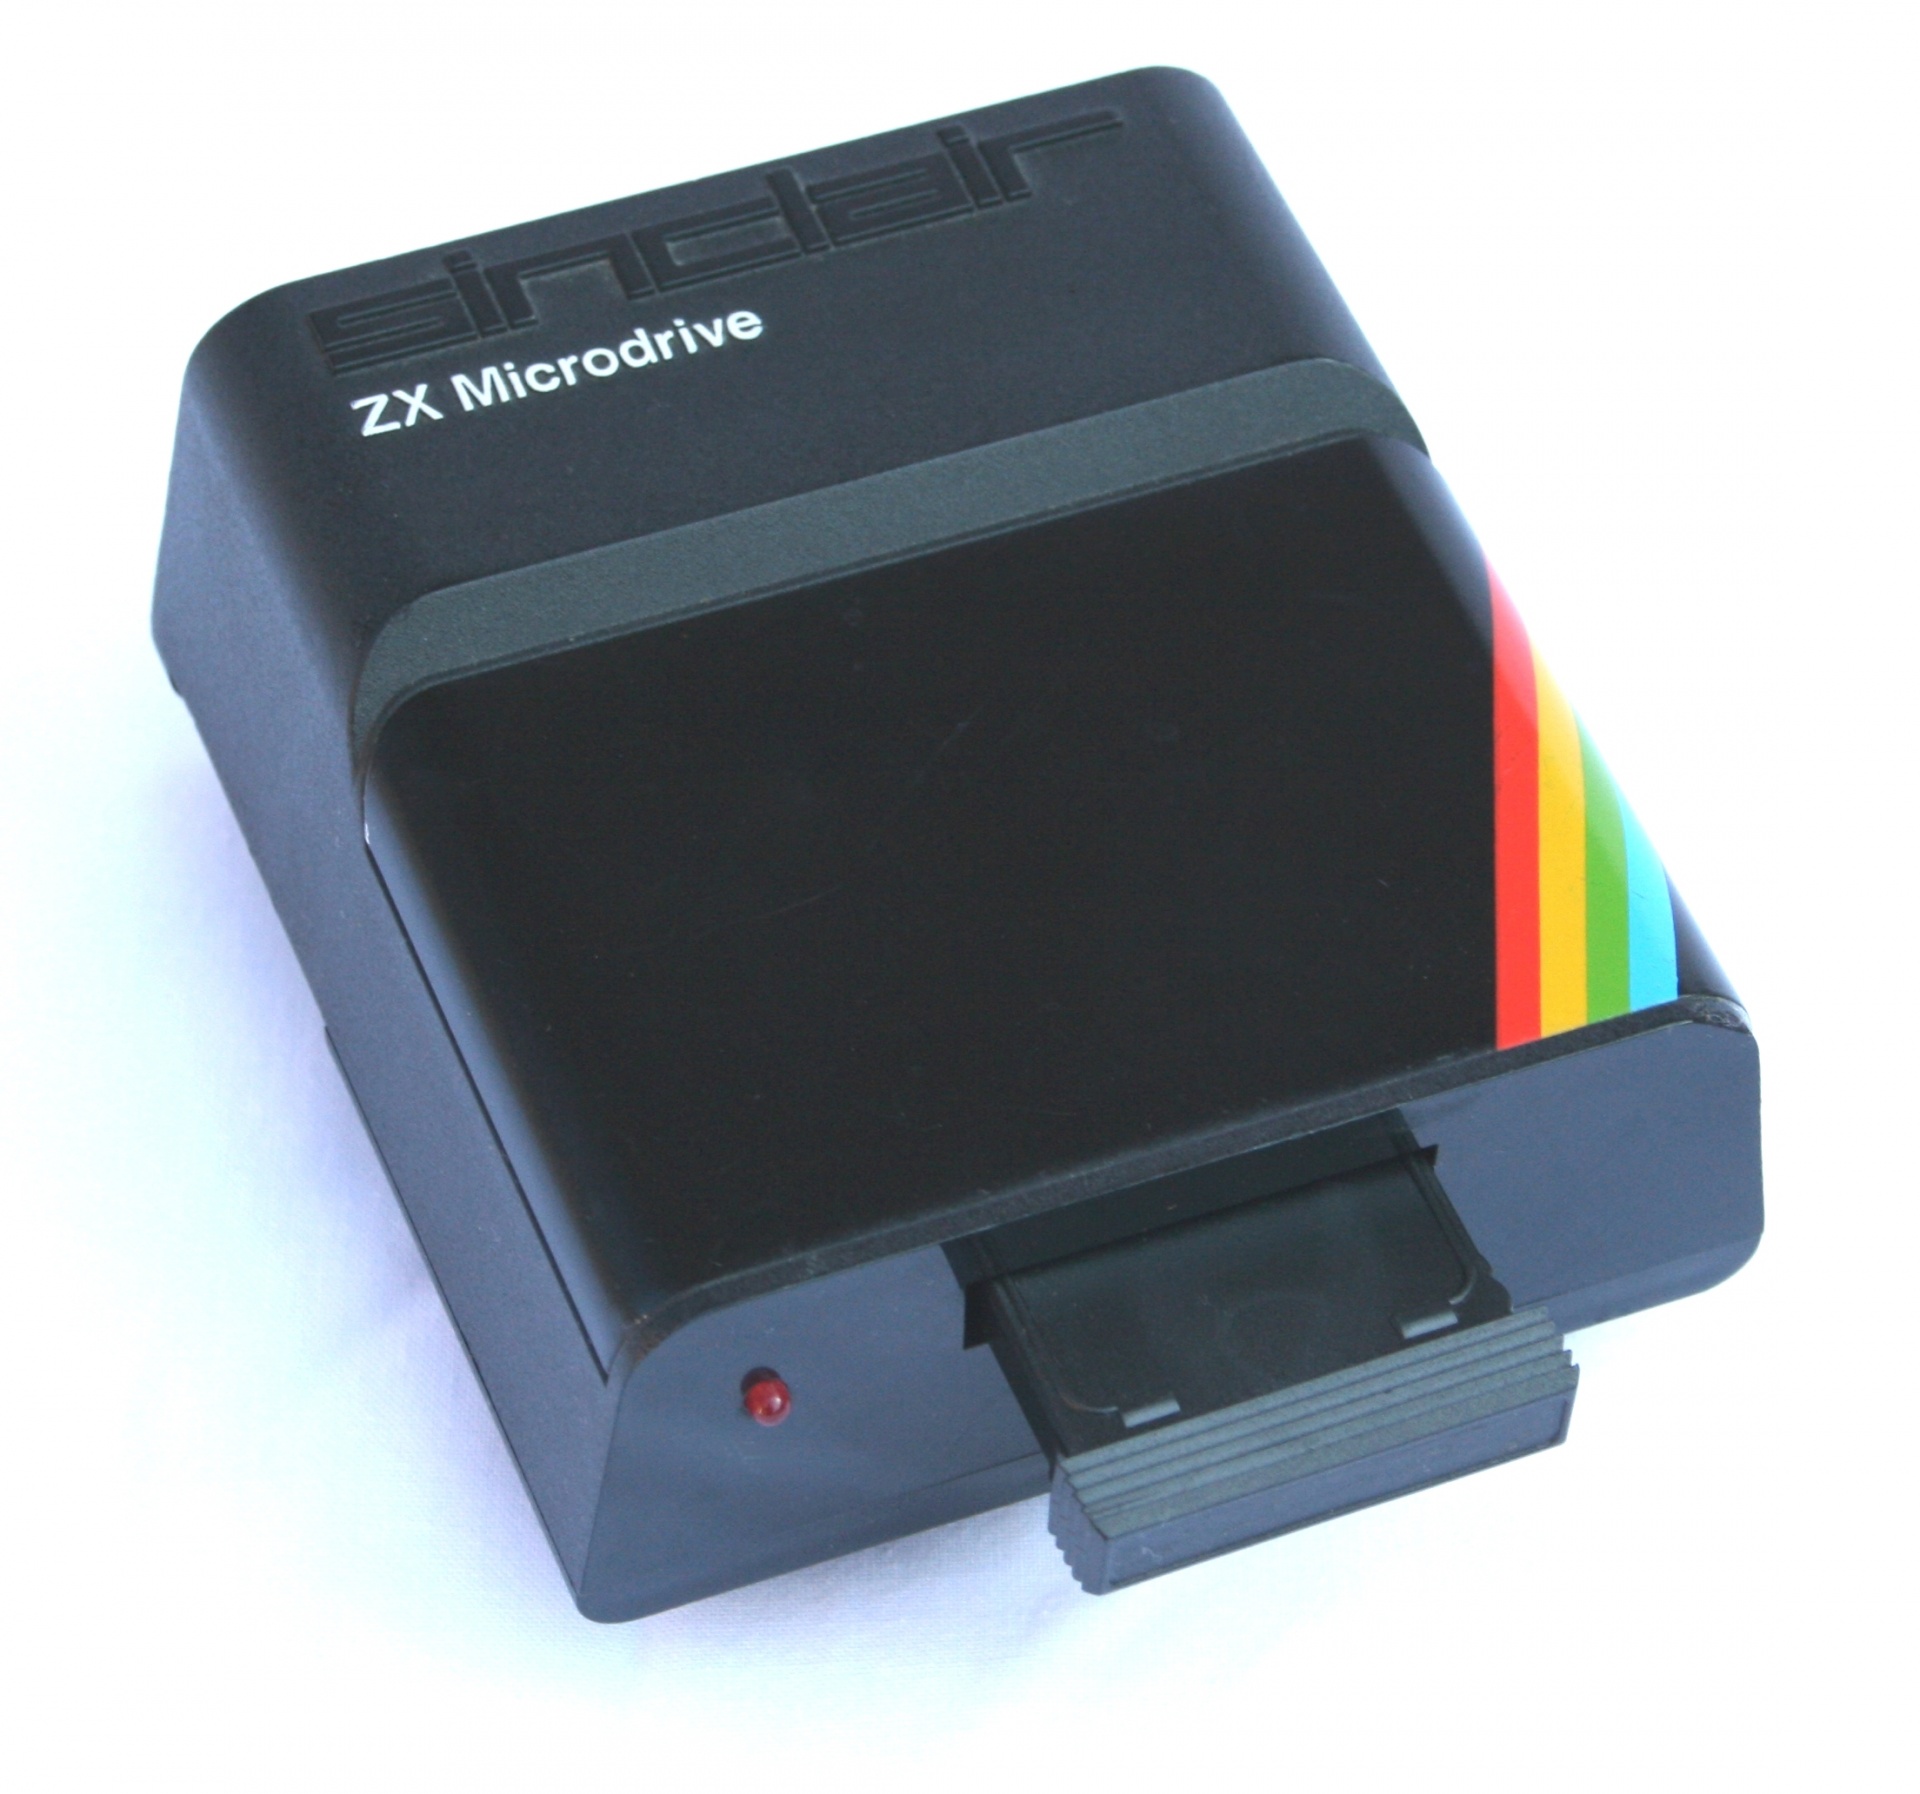 A single ZX Microdrive on a white background